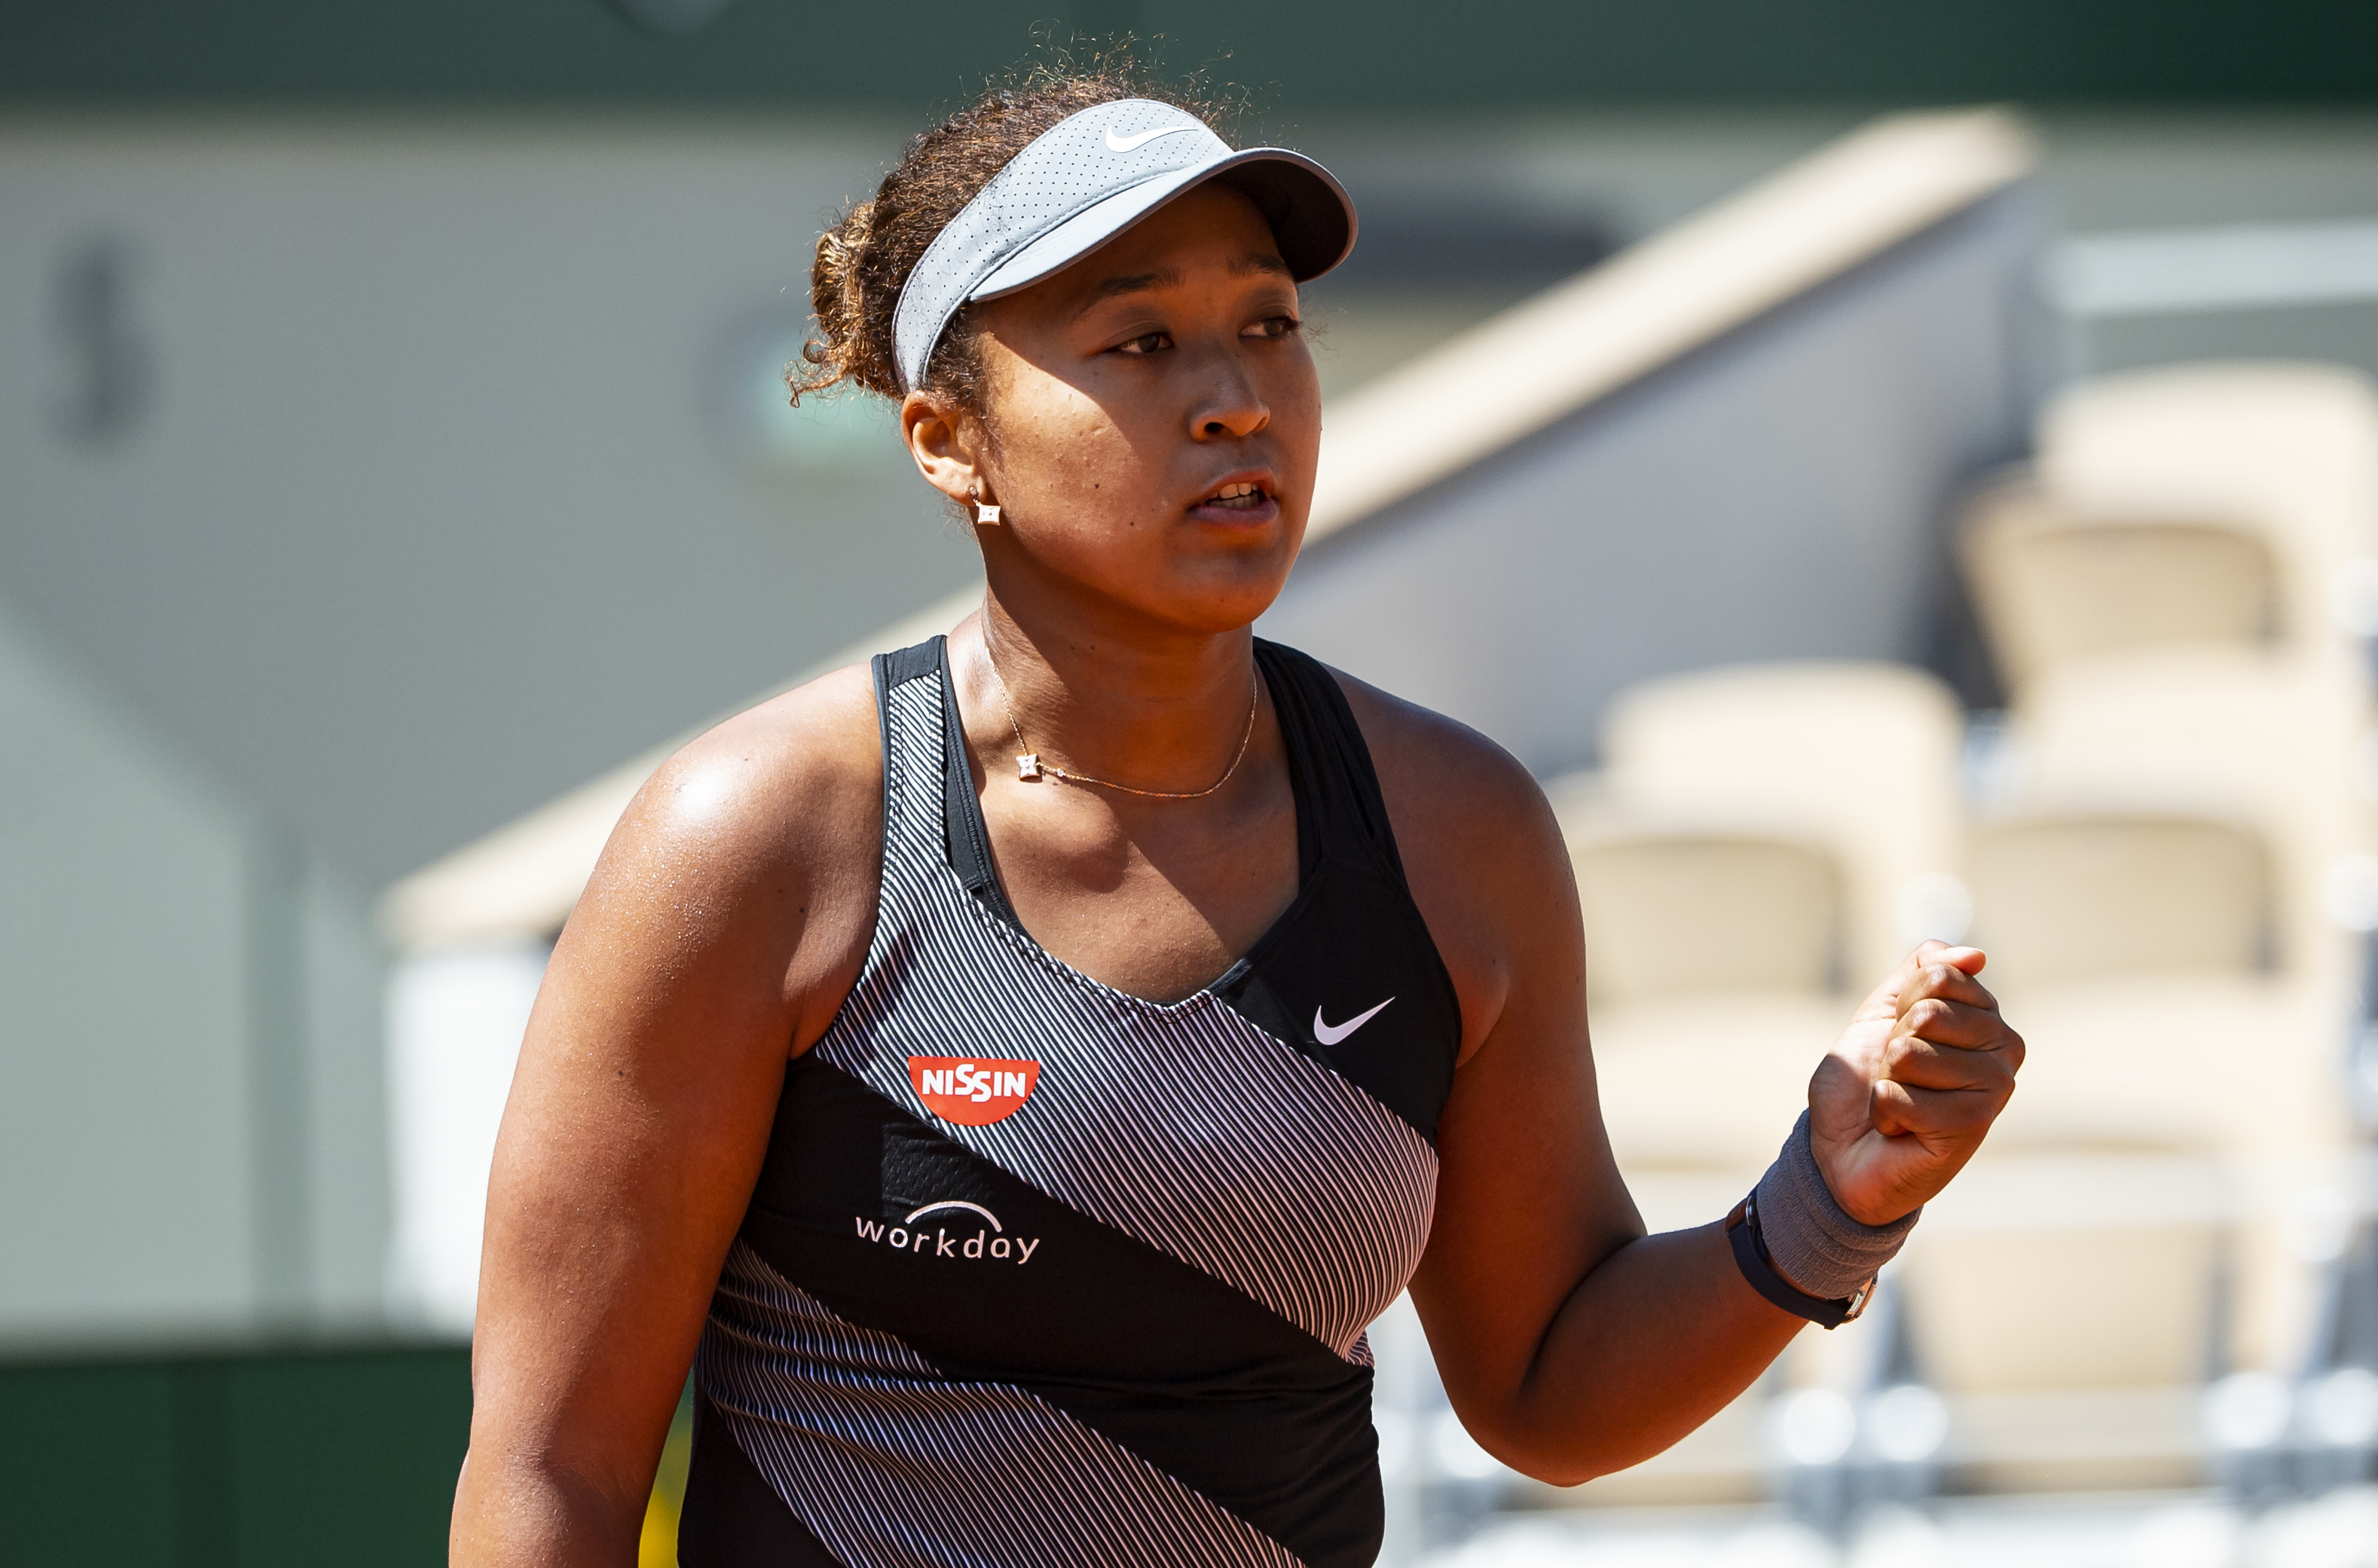 Naomi Osaka Shares Vogue Japan Cover After Withdrawing from French